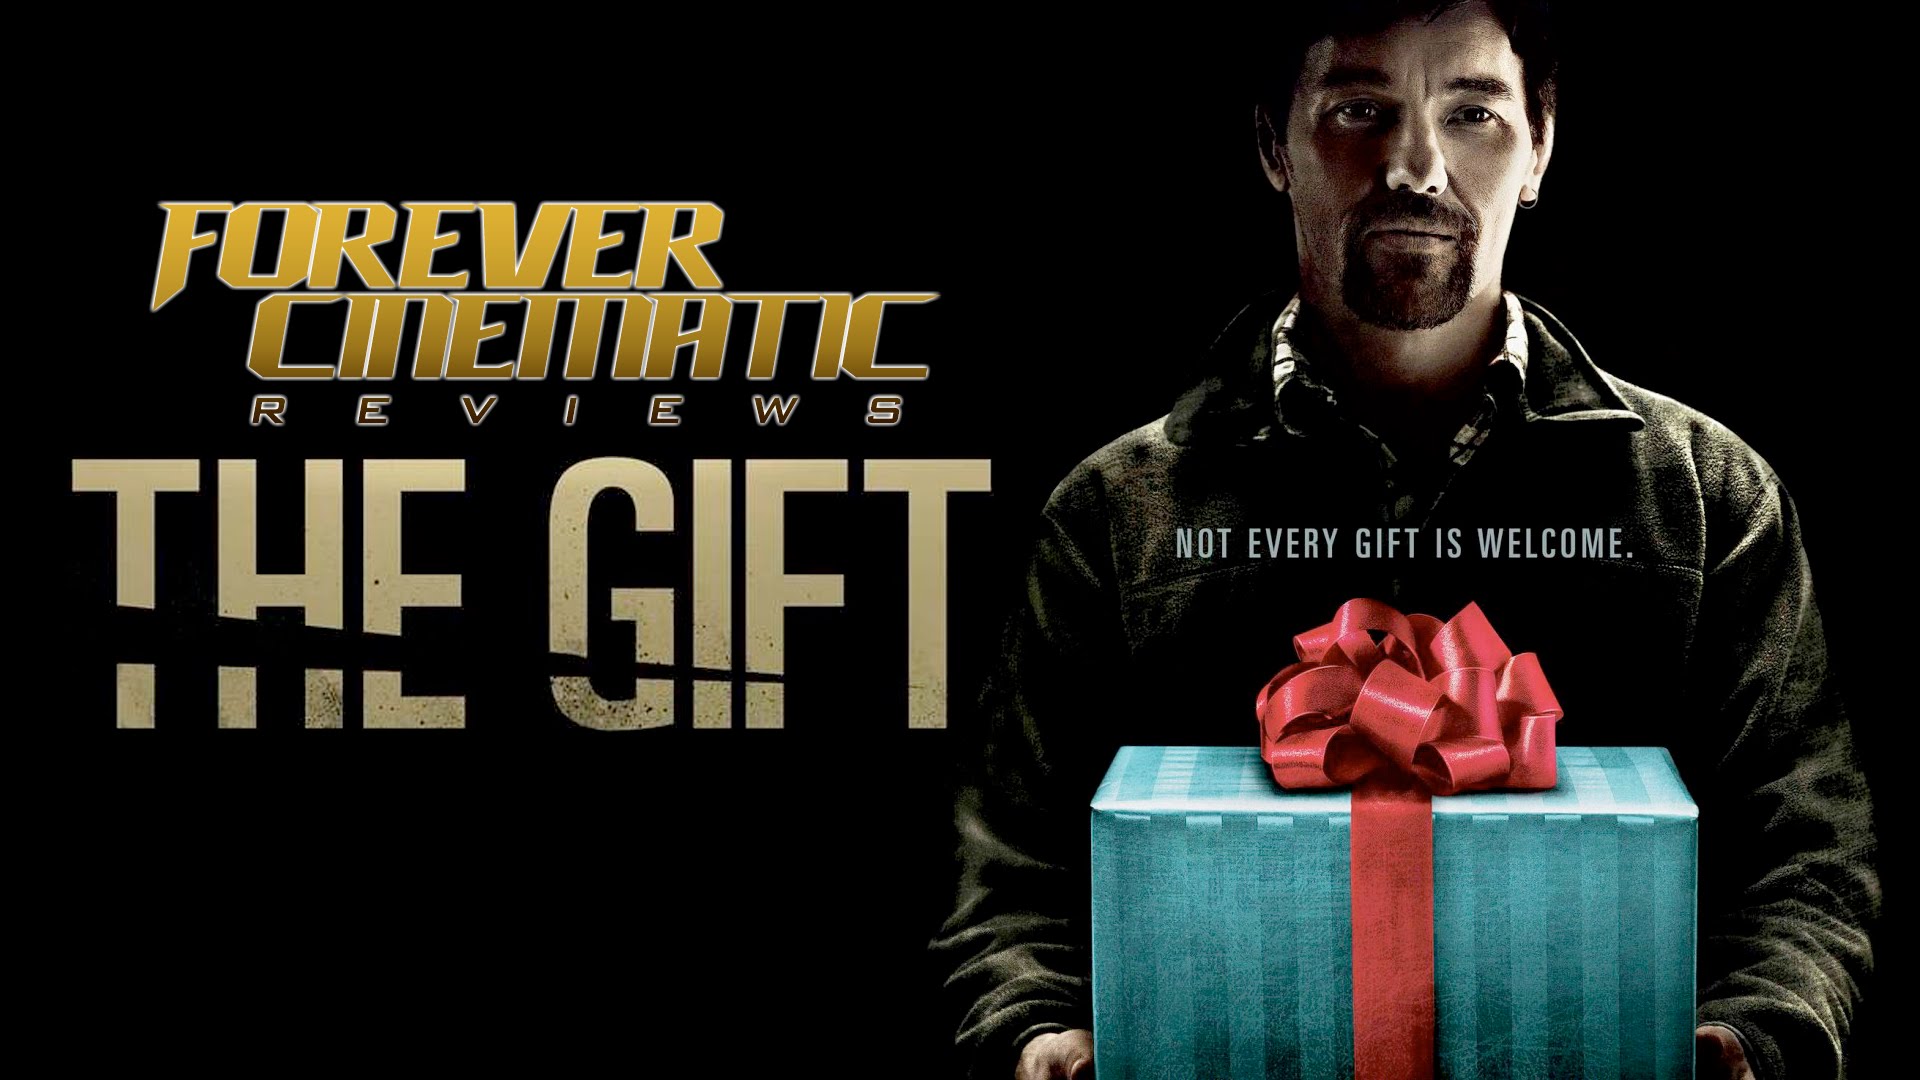 Amazing The Gift (2015) Pictures & Backgrounds